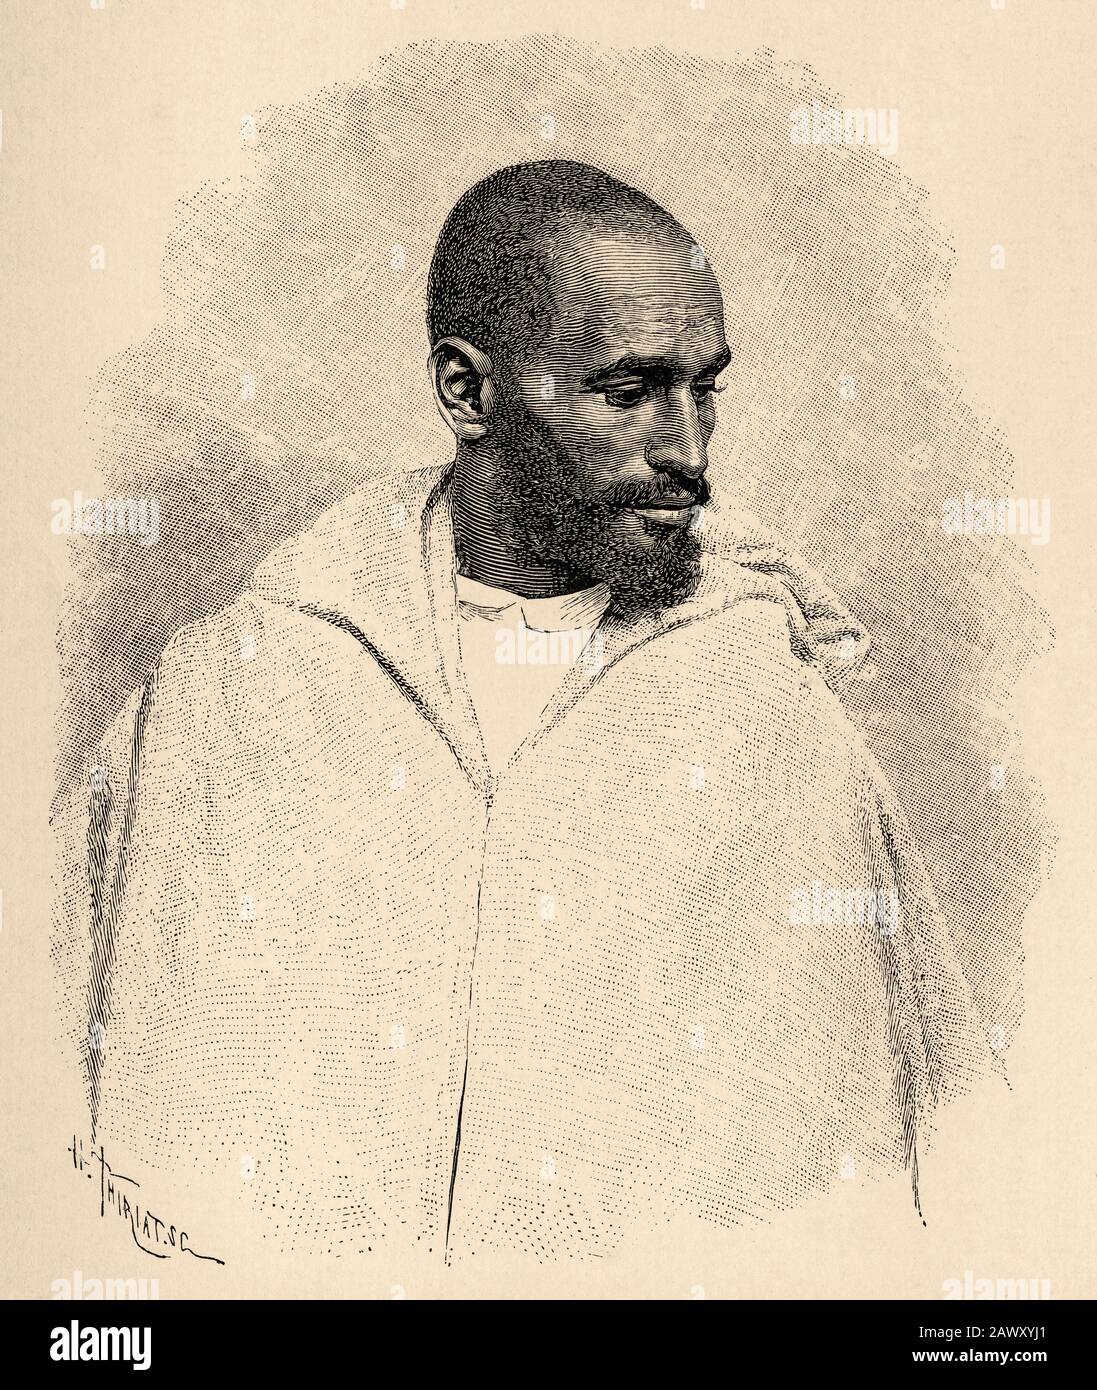 Portrait of Arab man from Tangier, Morocco. North Africa. Old engraving illustration from the book Nueva Geografia Universal by Eliseo Reclus 1889 Stock Photo